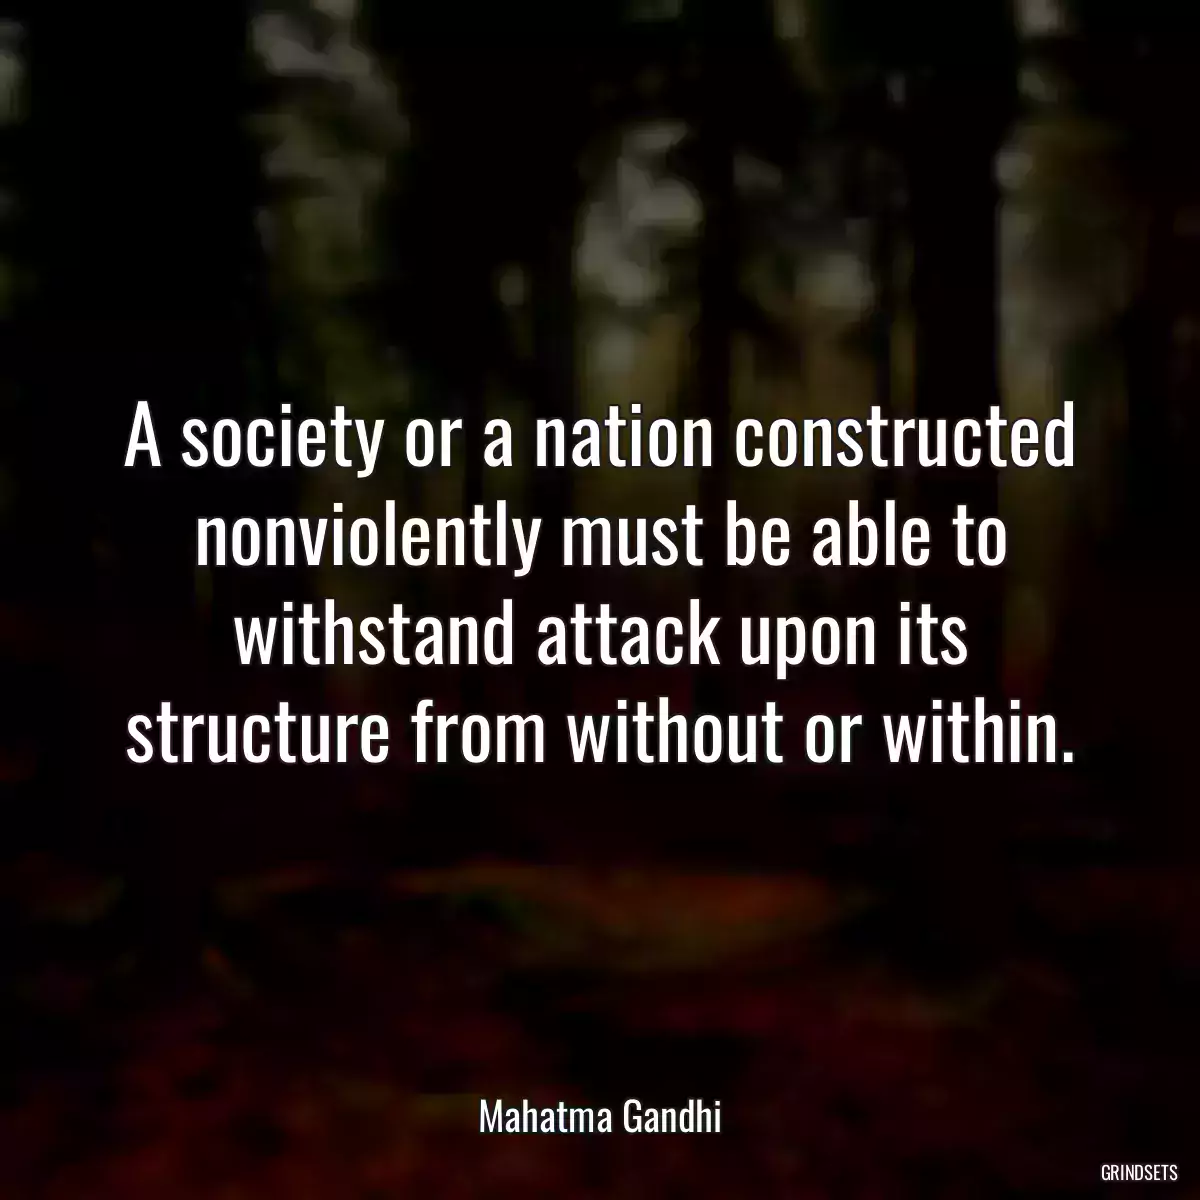 A society or a nation constructed nonviolently must be able to withstand attack upon its structure from without or within.